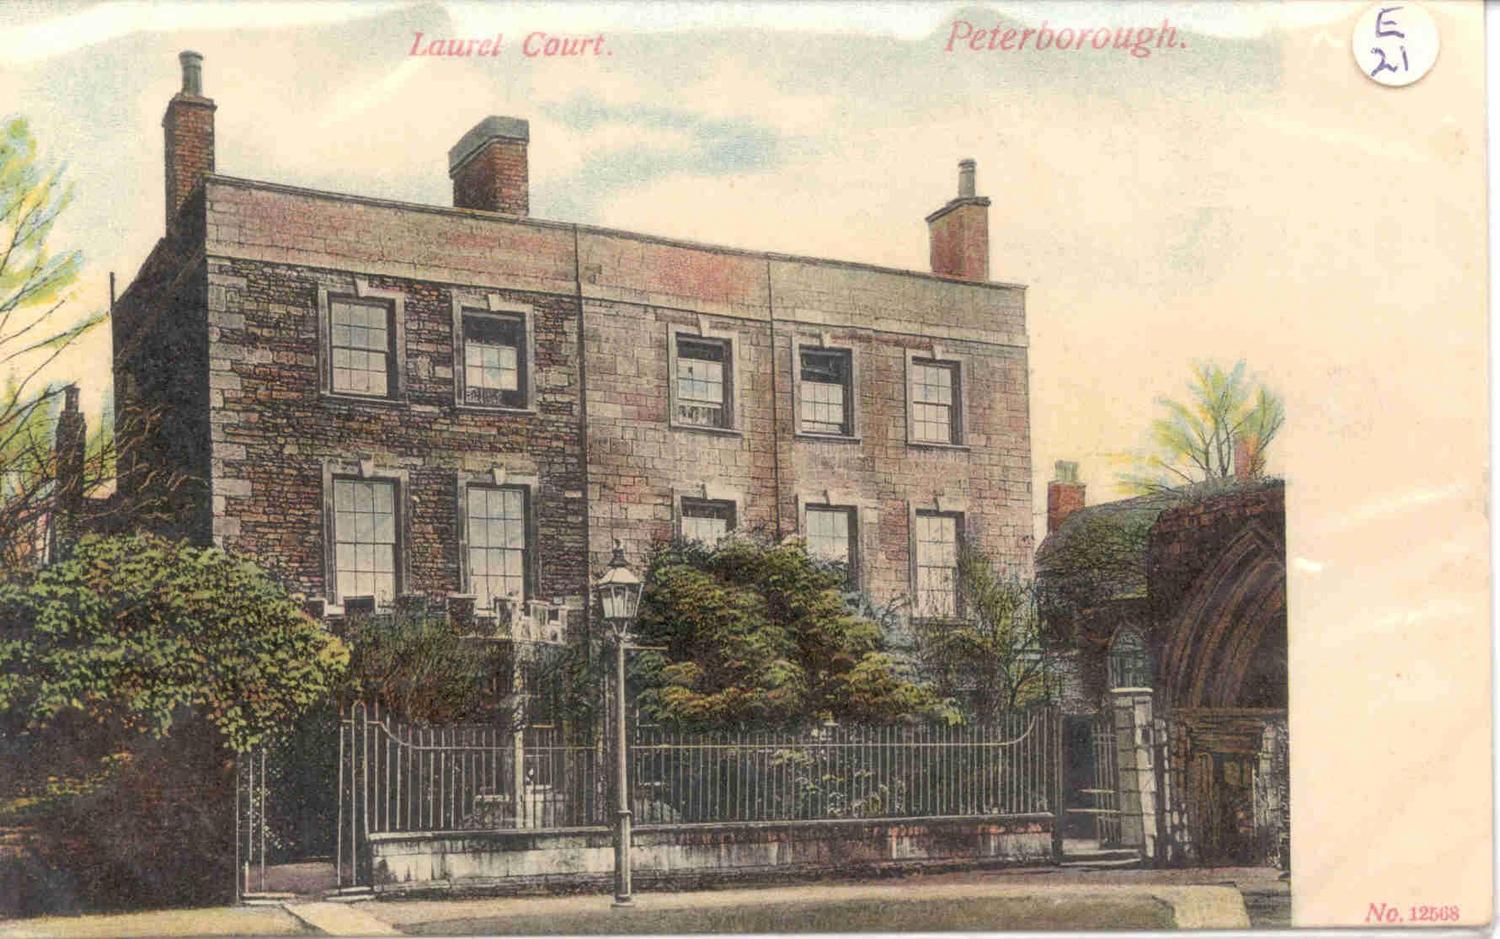 A postcard depicting Laurel Court within Peterborough Cathedral Presincts